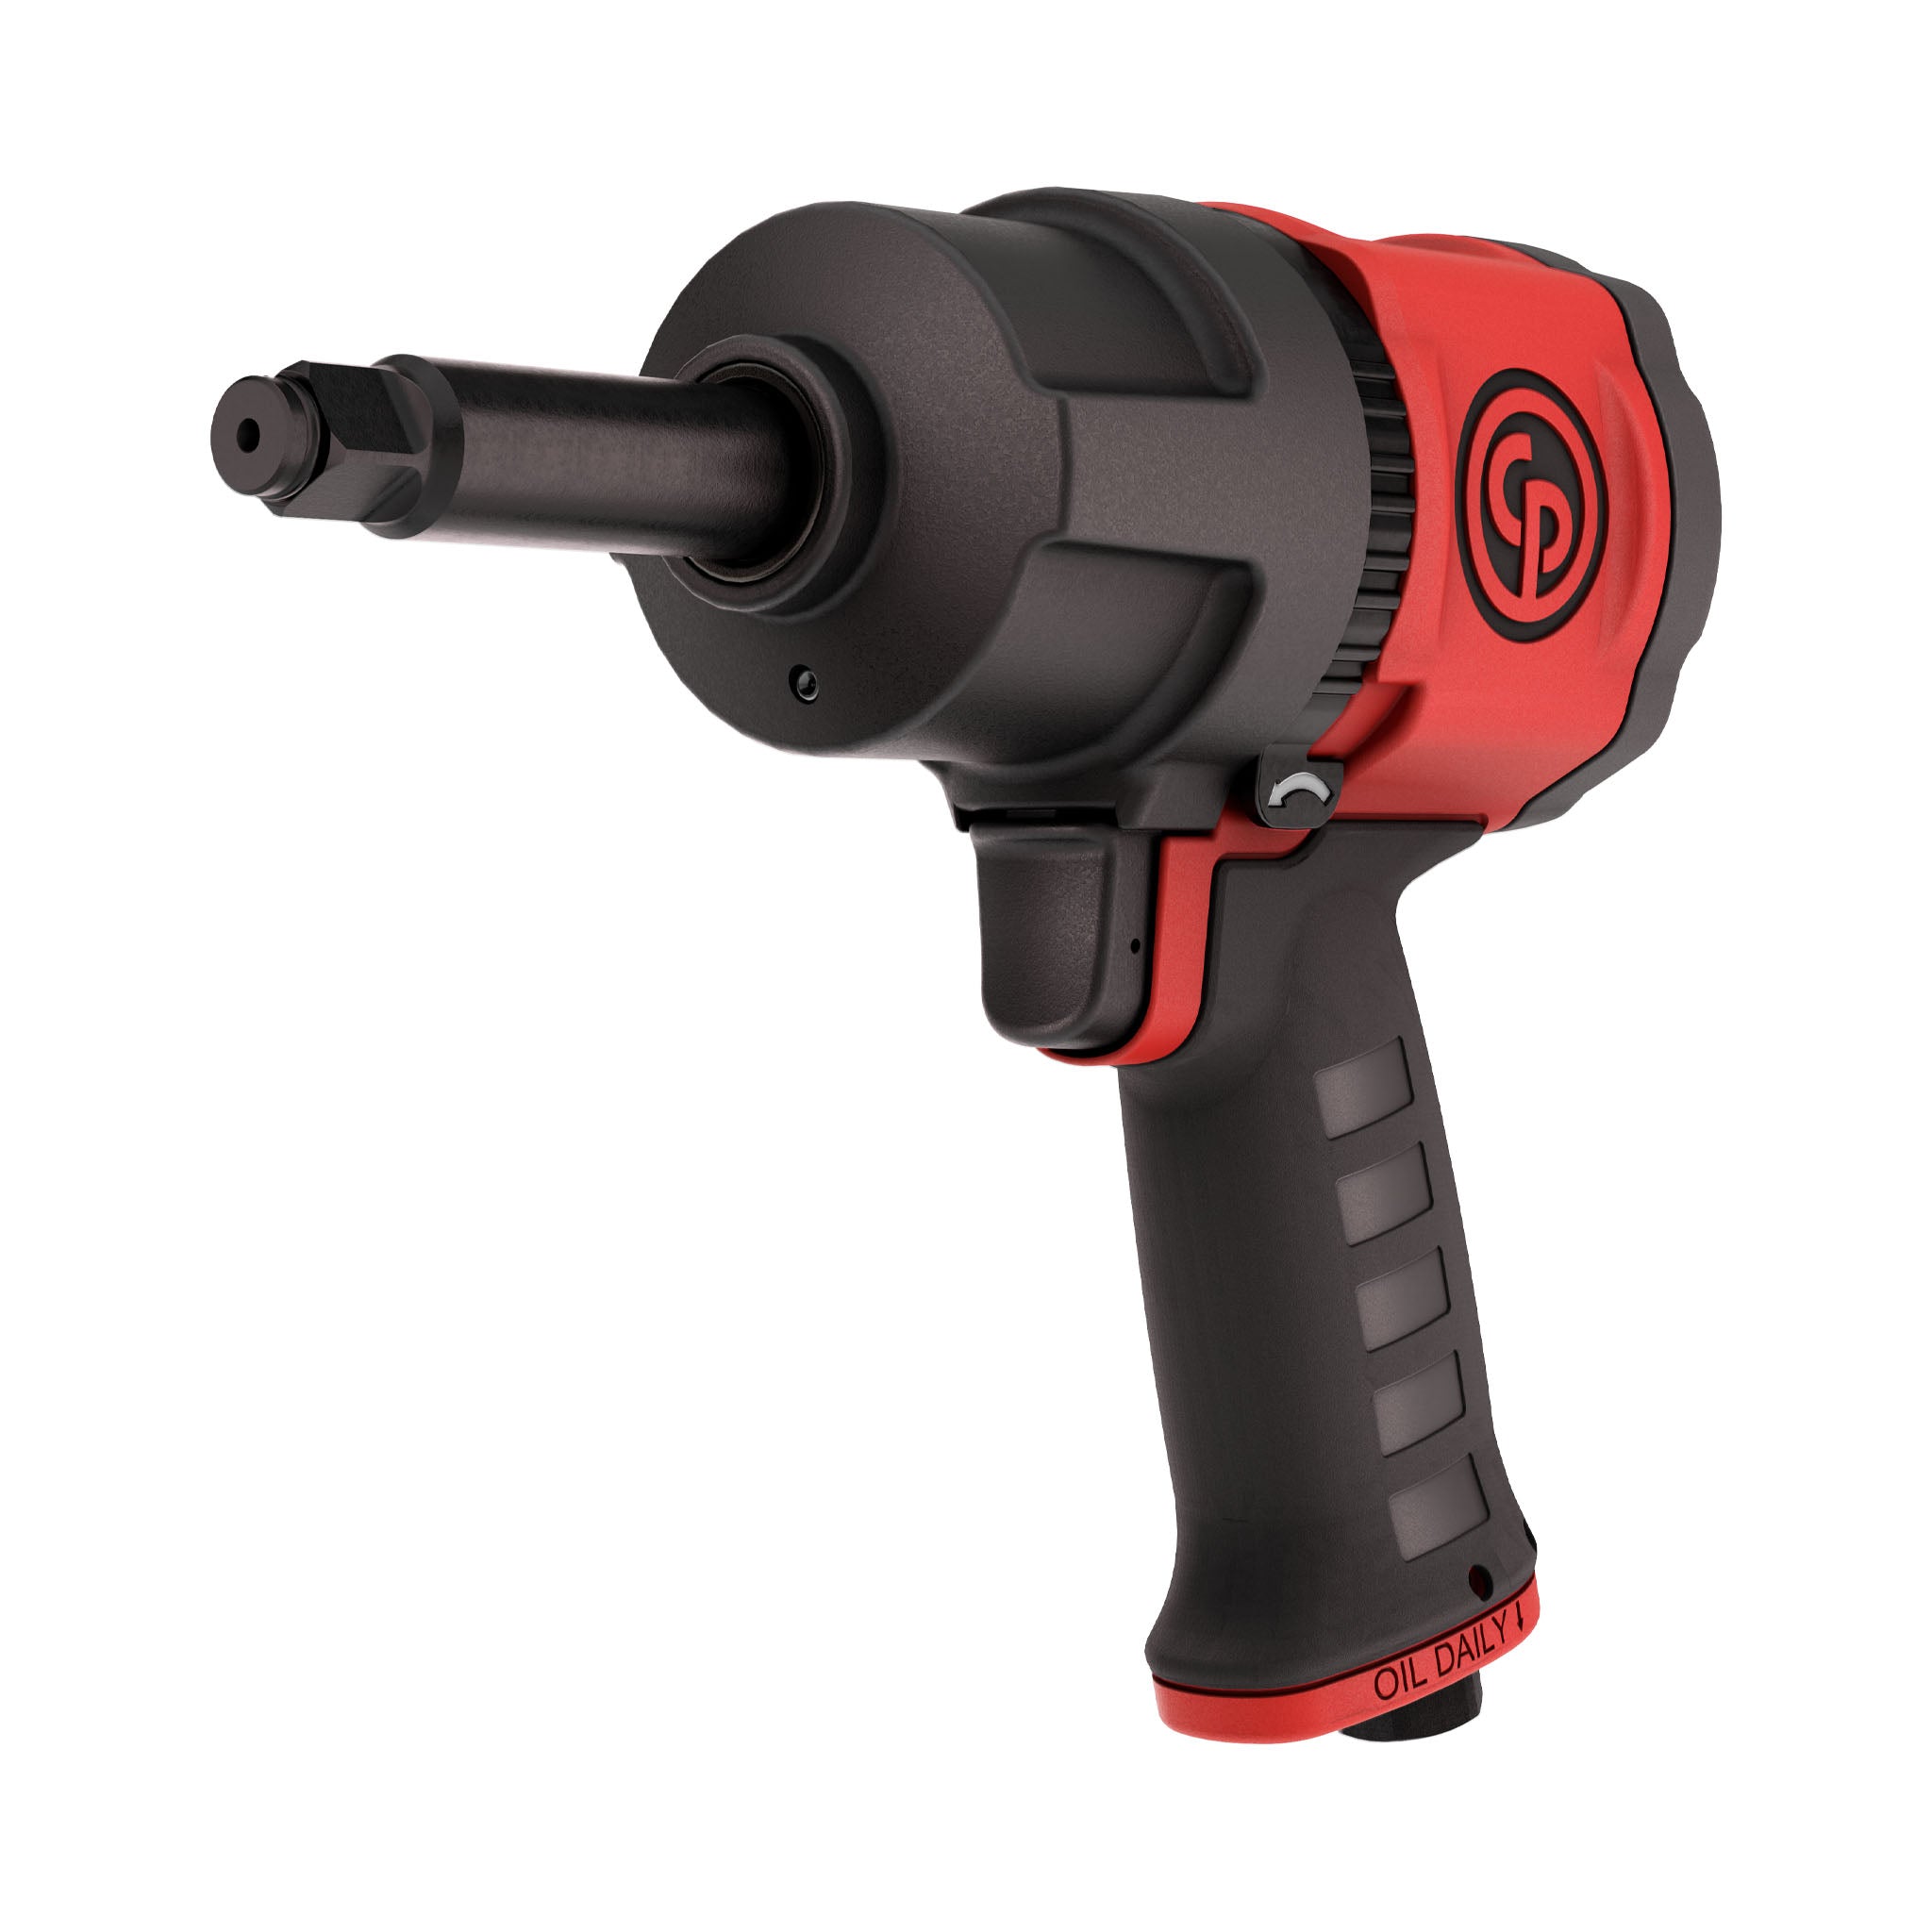 Chicago Pneumatic 1/2" Impact Wrench - CP-7748-2